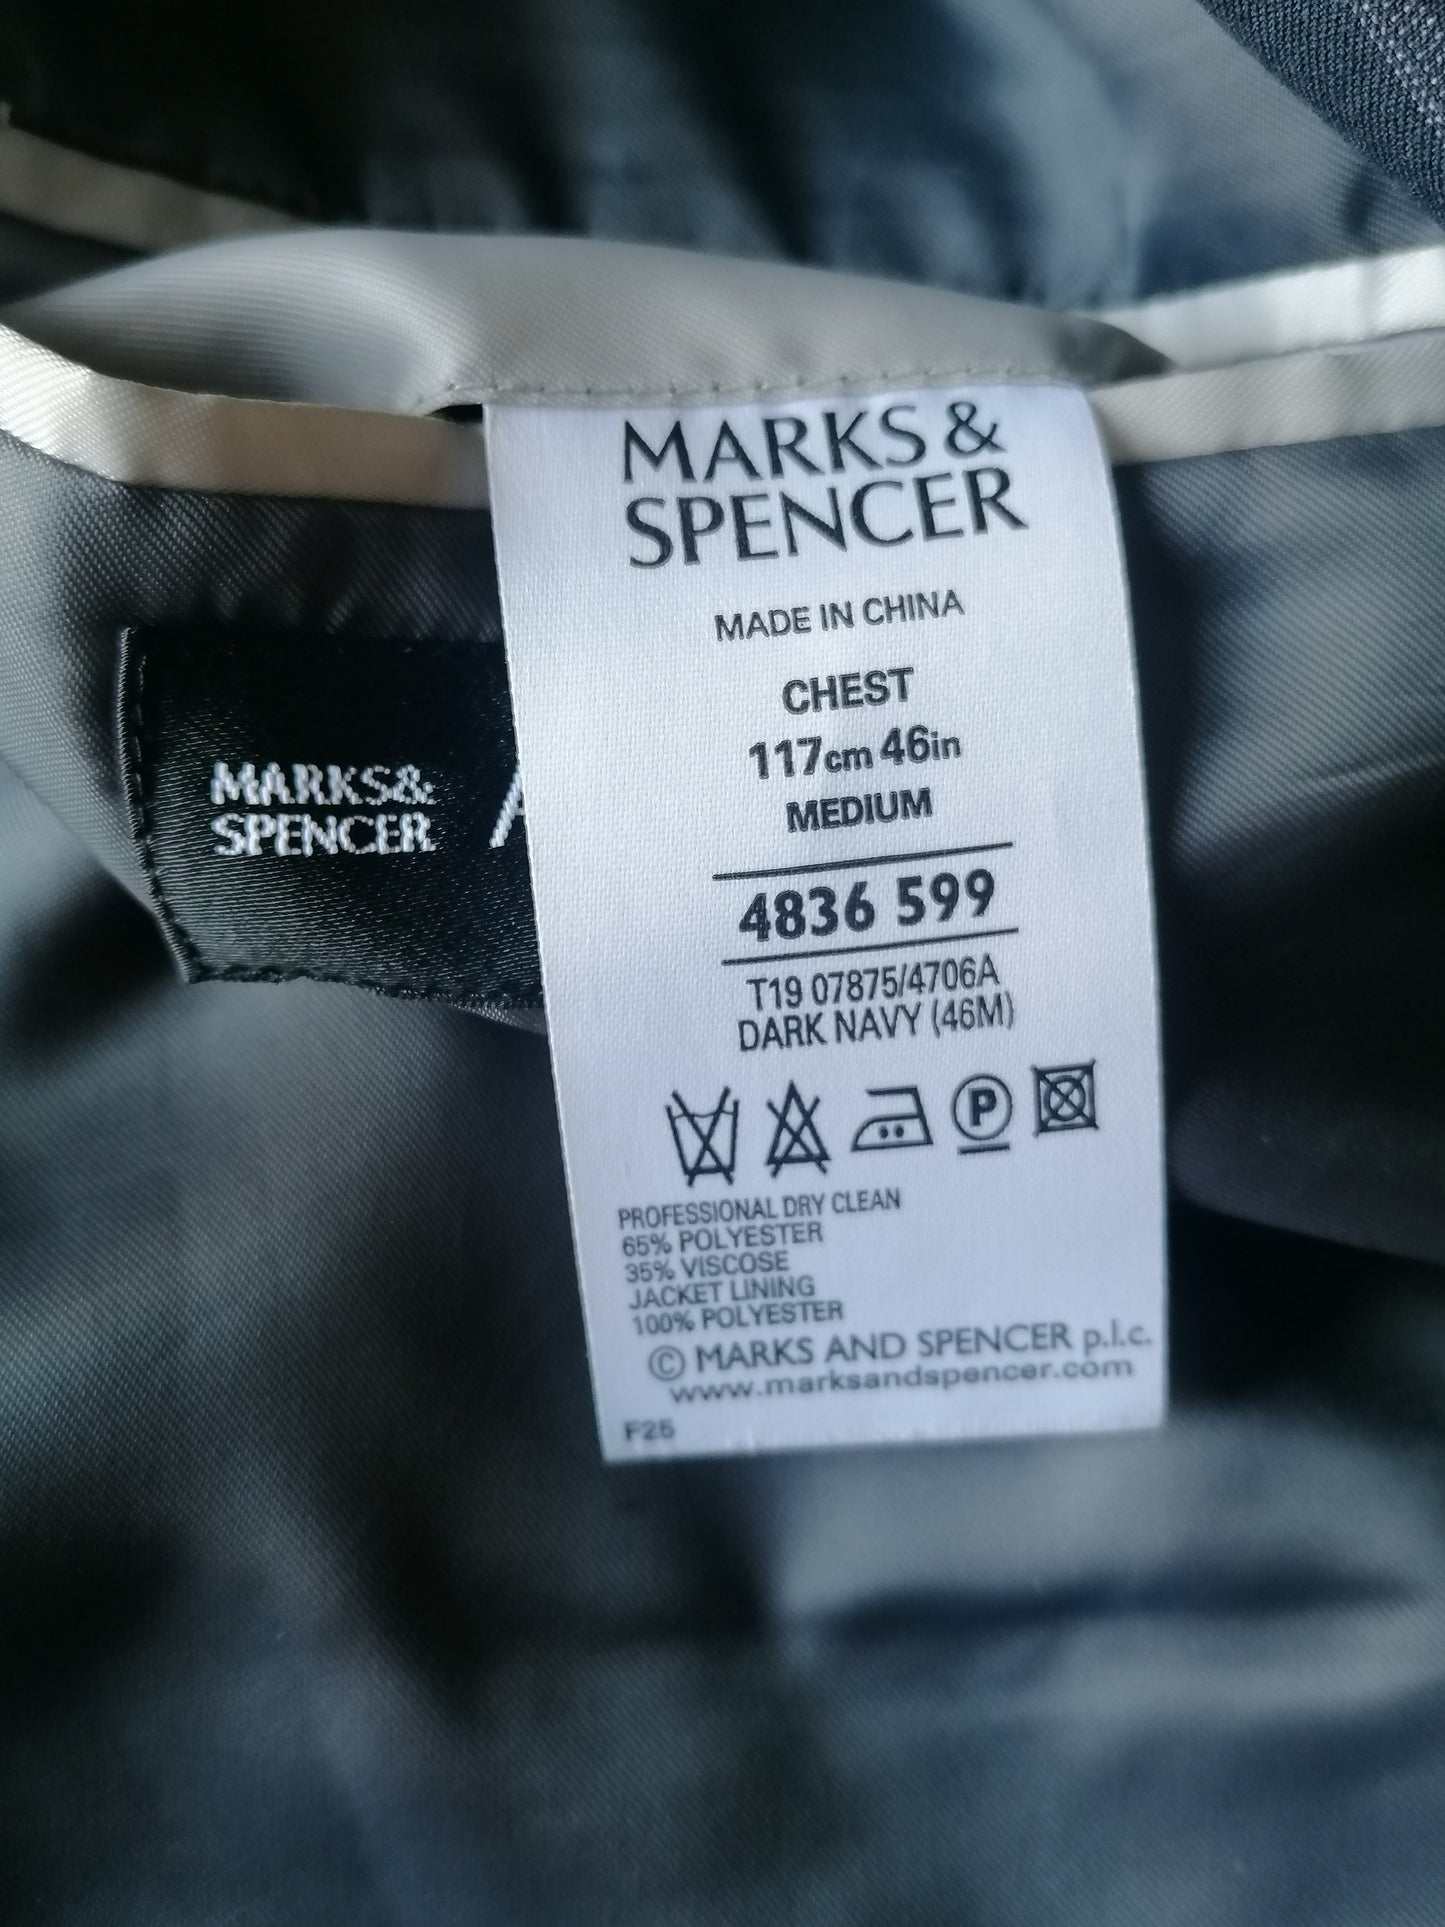 Autograph (Marks & Spencer) jacket. Black and white striped. Size 56 / XL.